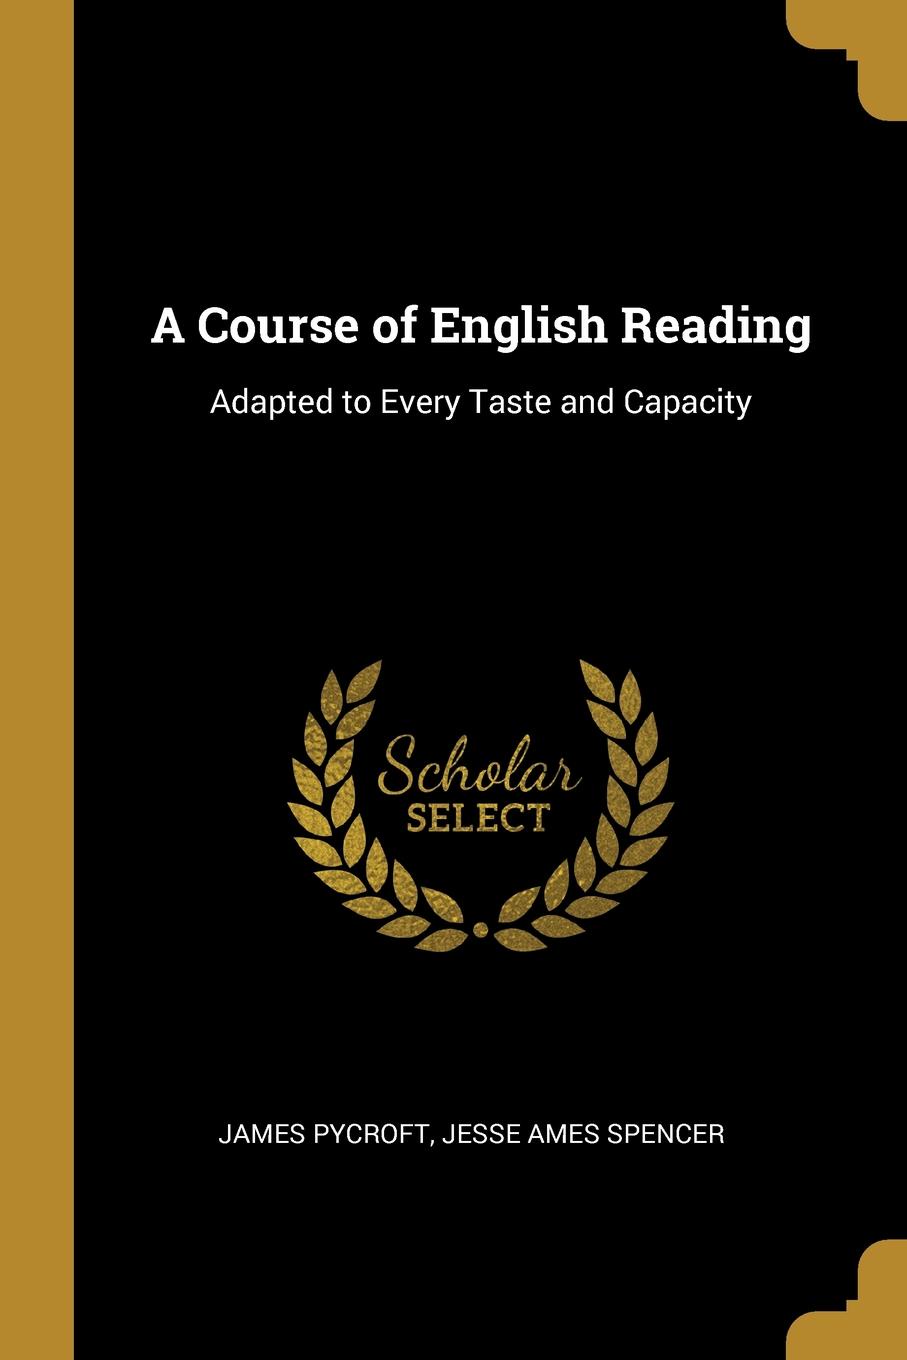 A Course of English Reading. Adapted to Every Taste and Capacity